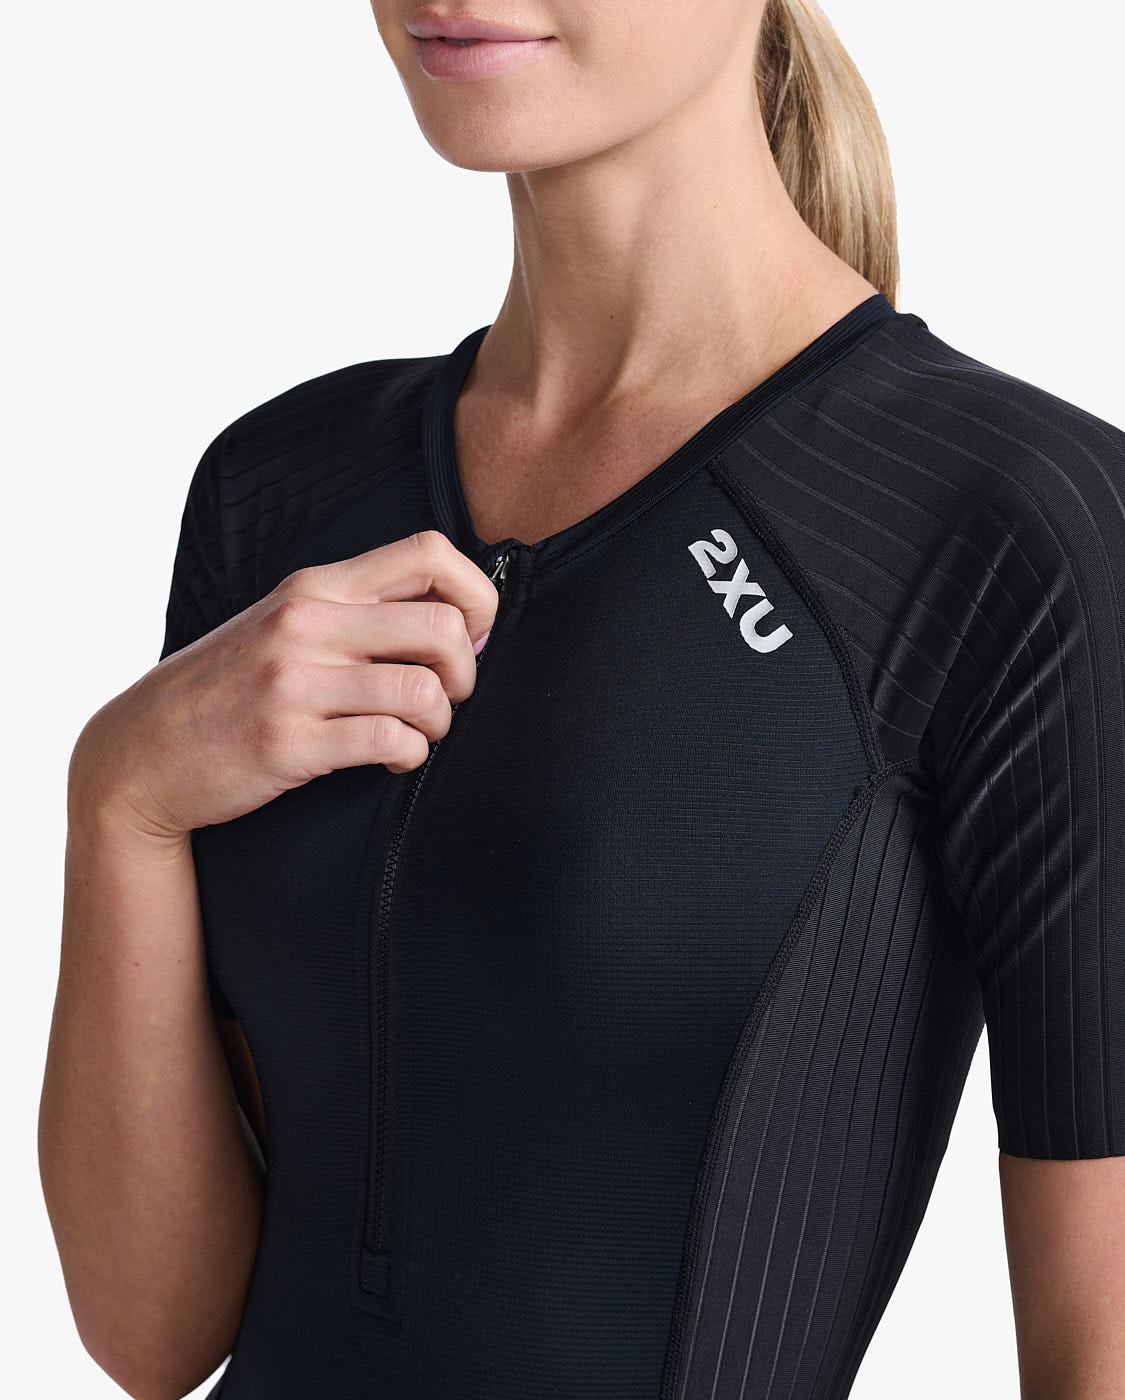 2XU South Africa - Womens Aero Sleeved Trisuit - BLK/WHT